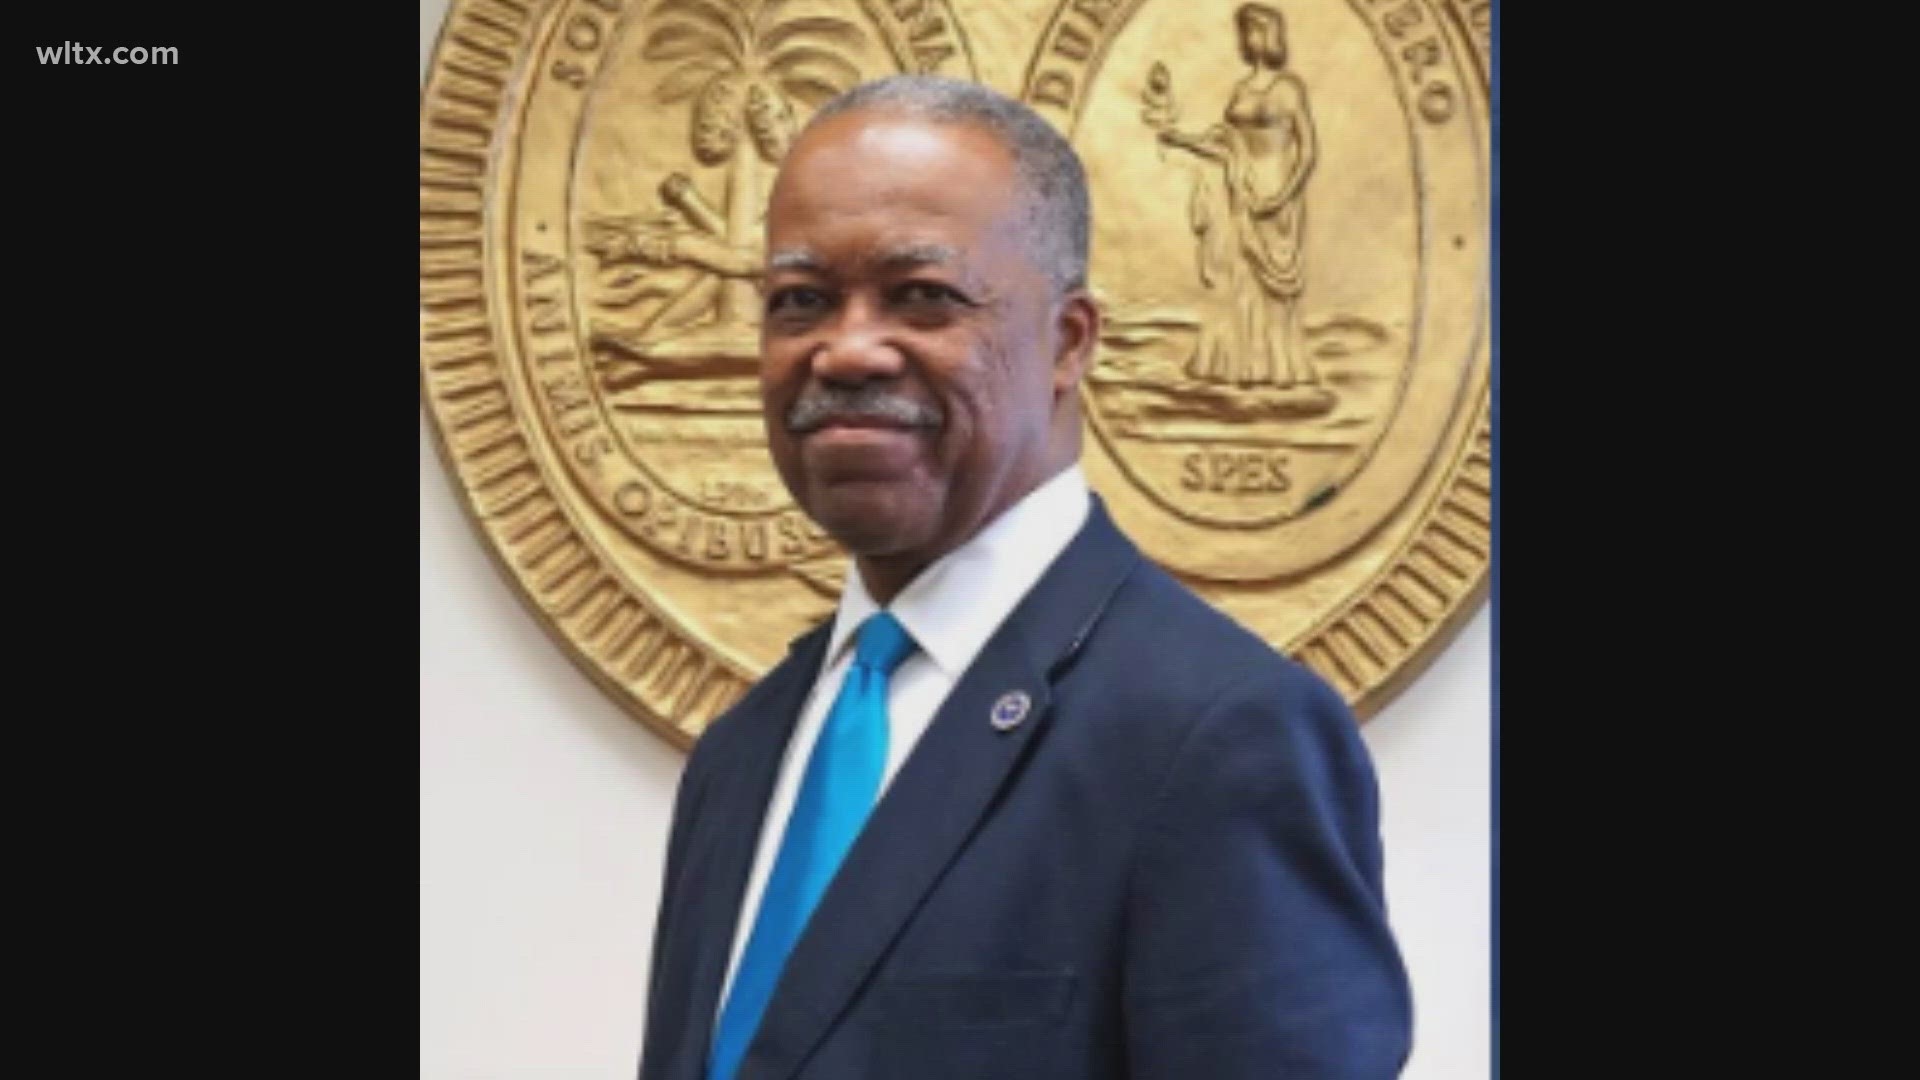 Mack served Charleston and Dorchester counties from 1997 to 2021. He was also the former chairman of the Black Legislative Caucus.